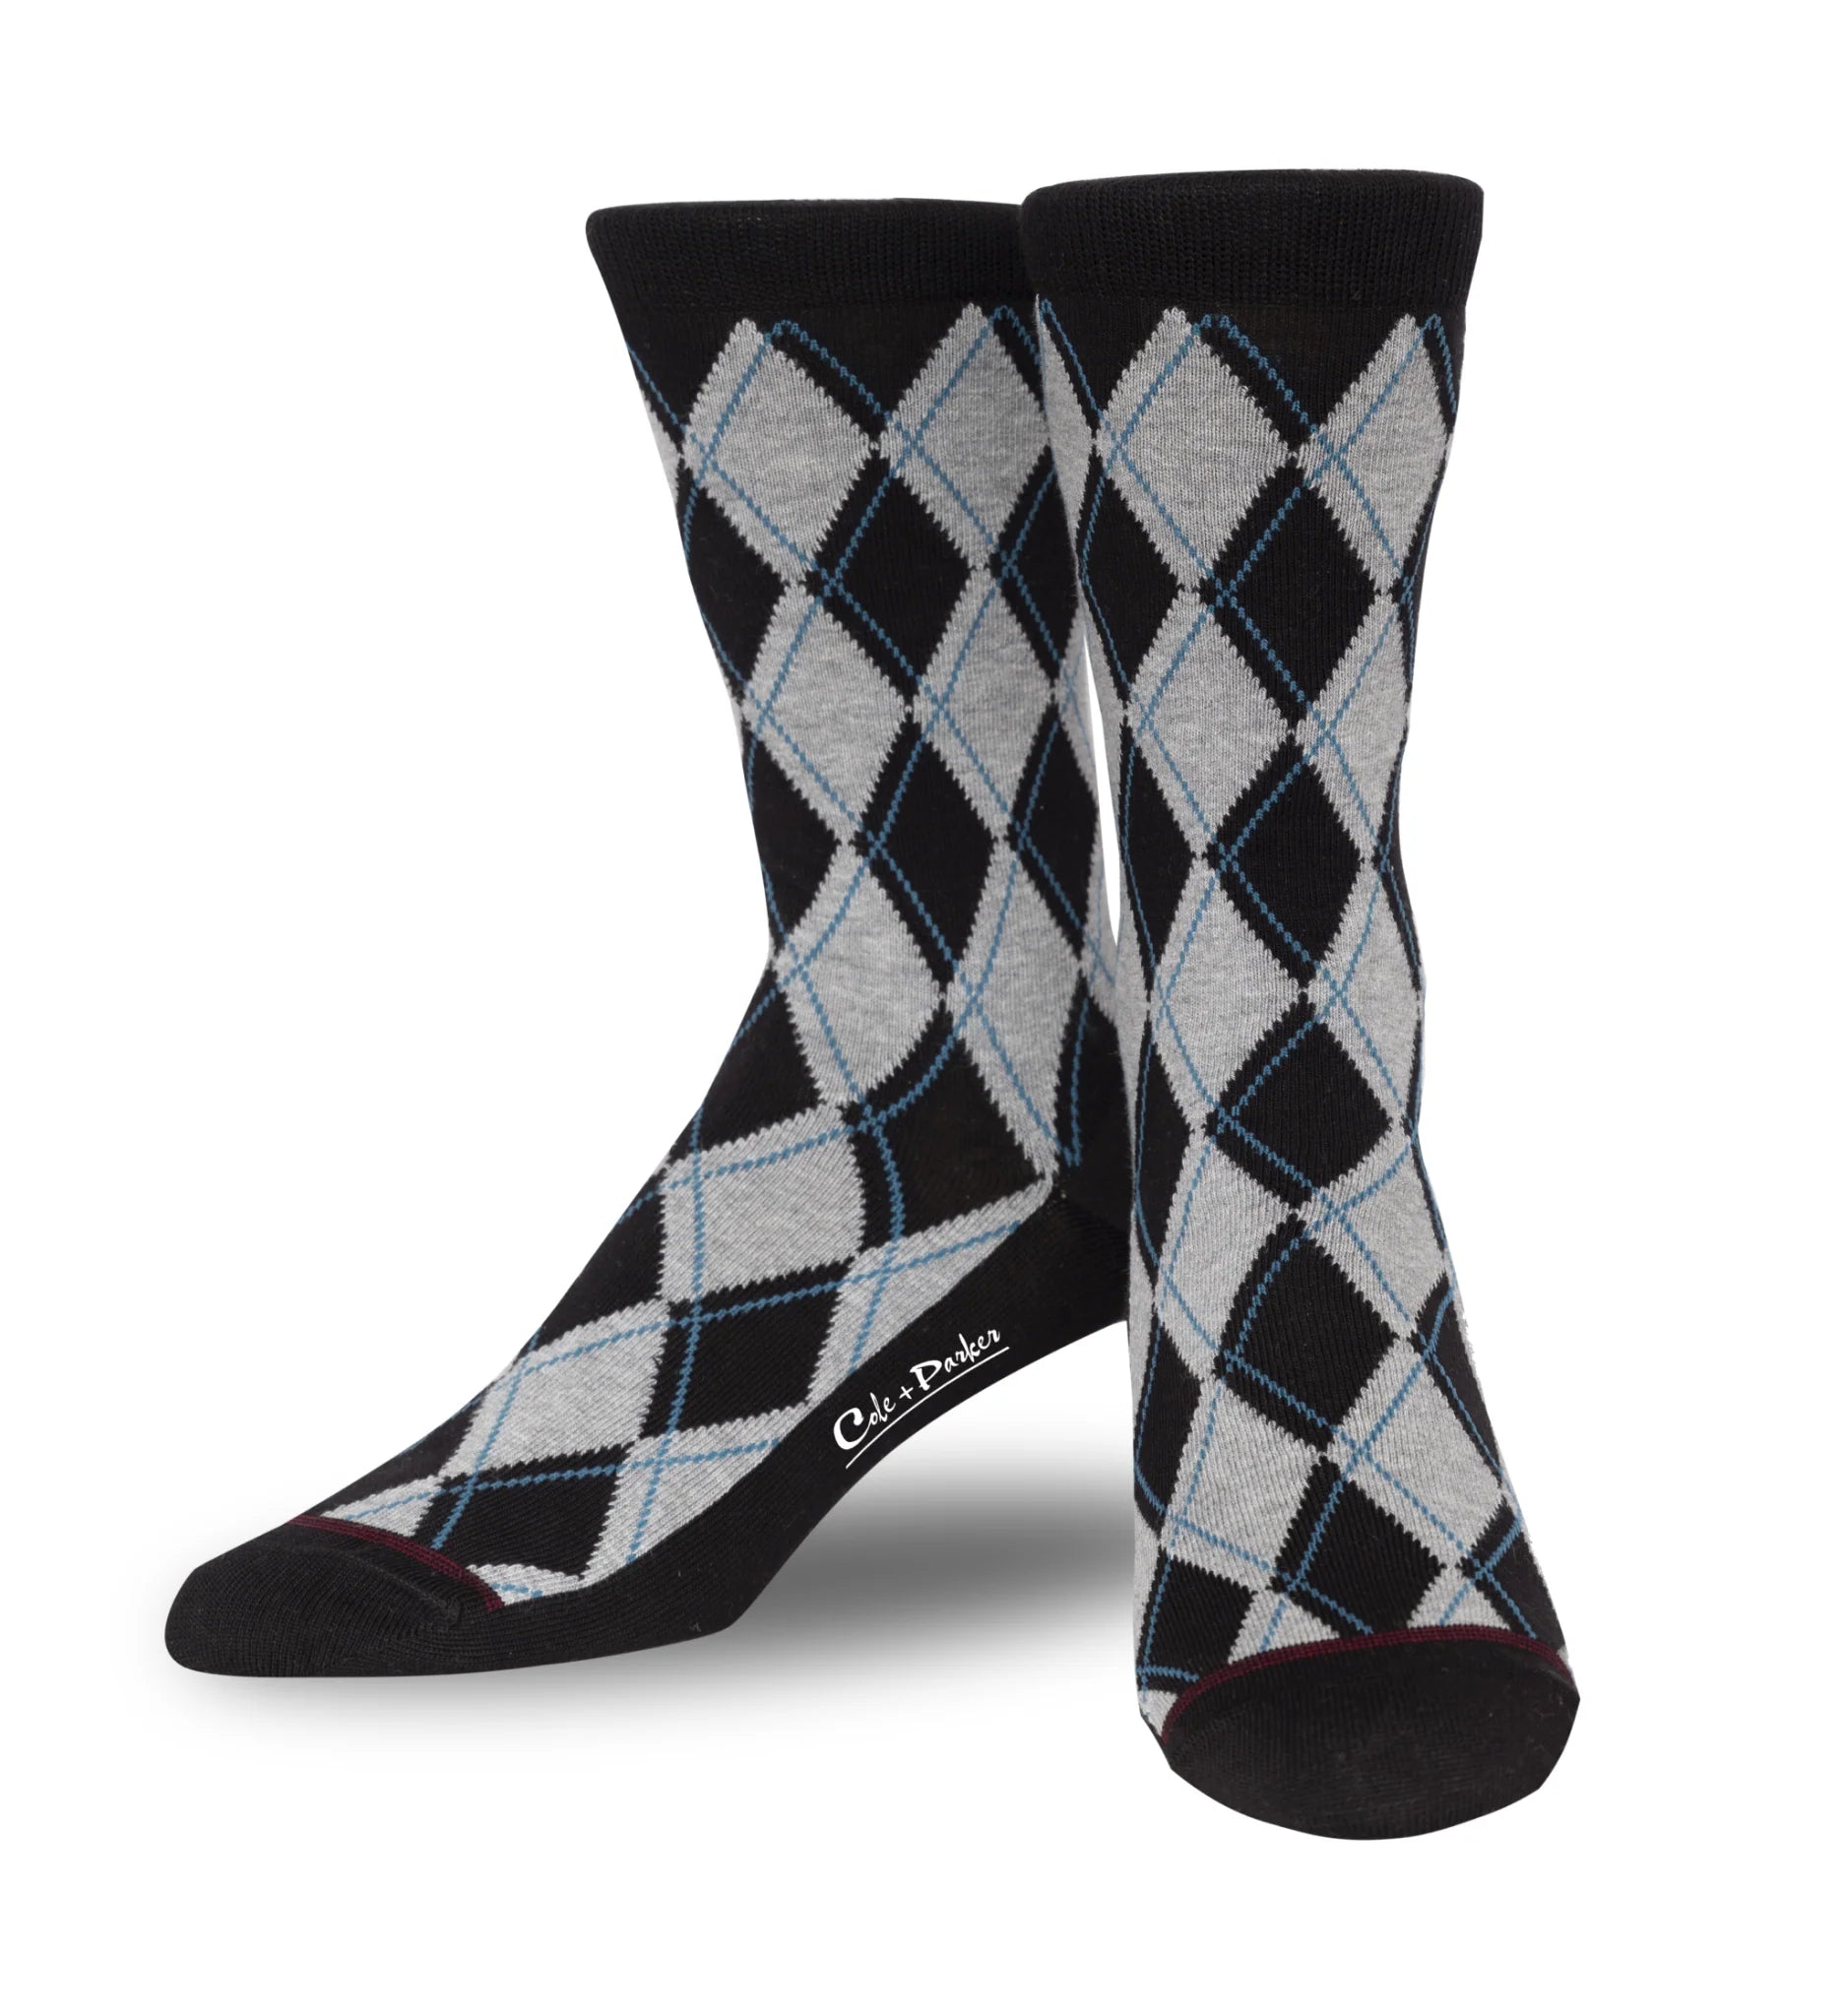 Argyle Sock in Black and Grey color